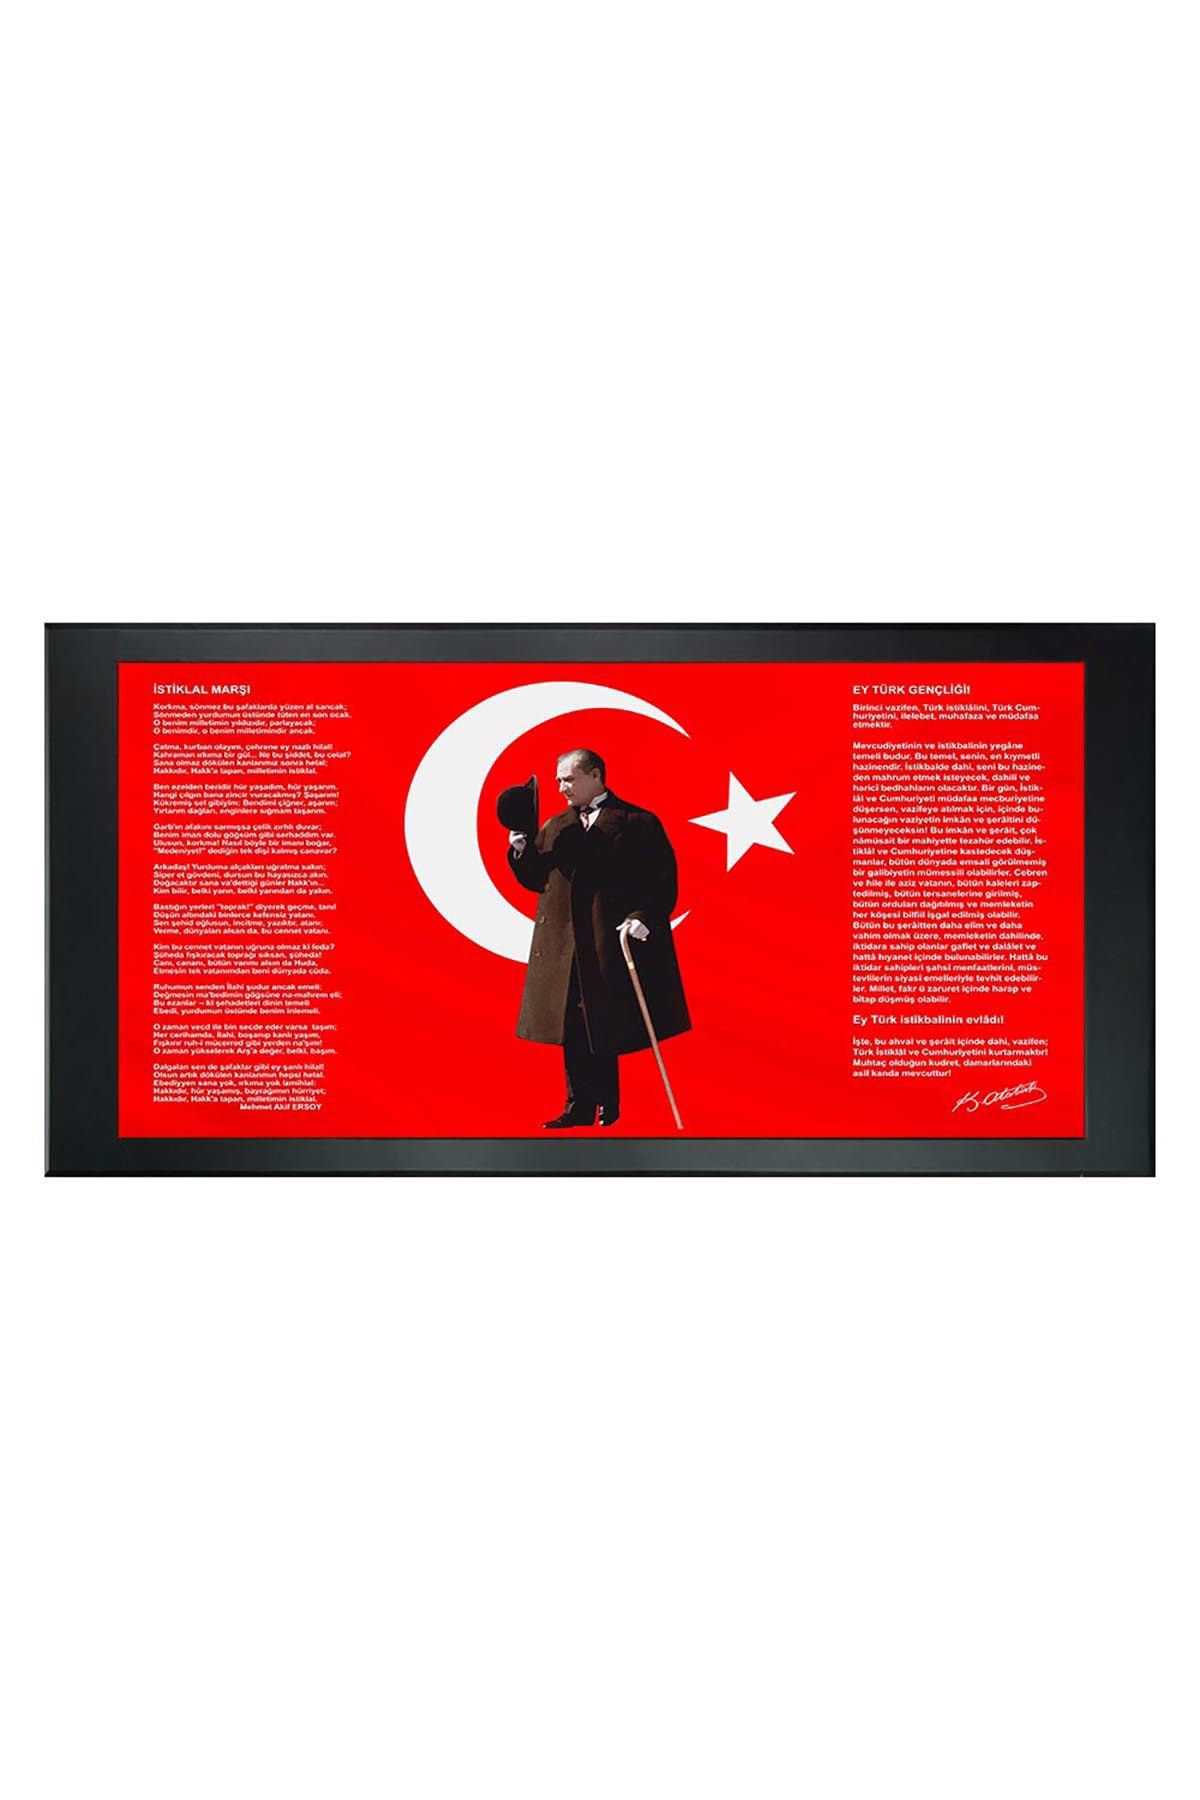 Atatürk Printed Manager Board | Printed Manager Board | Leather Framed Board | High Quality Manager Board   